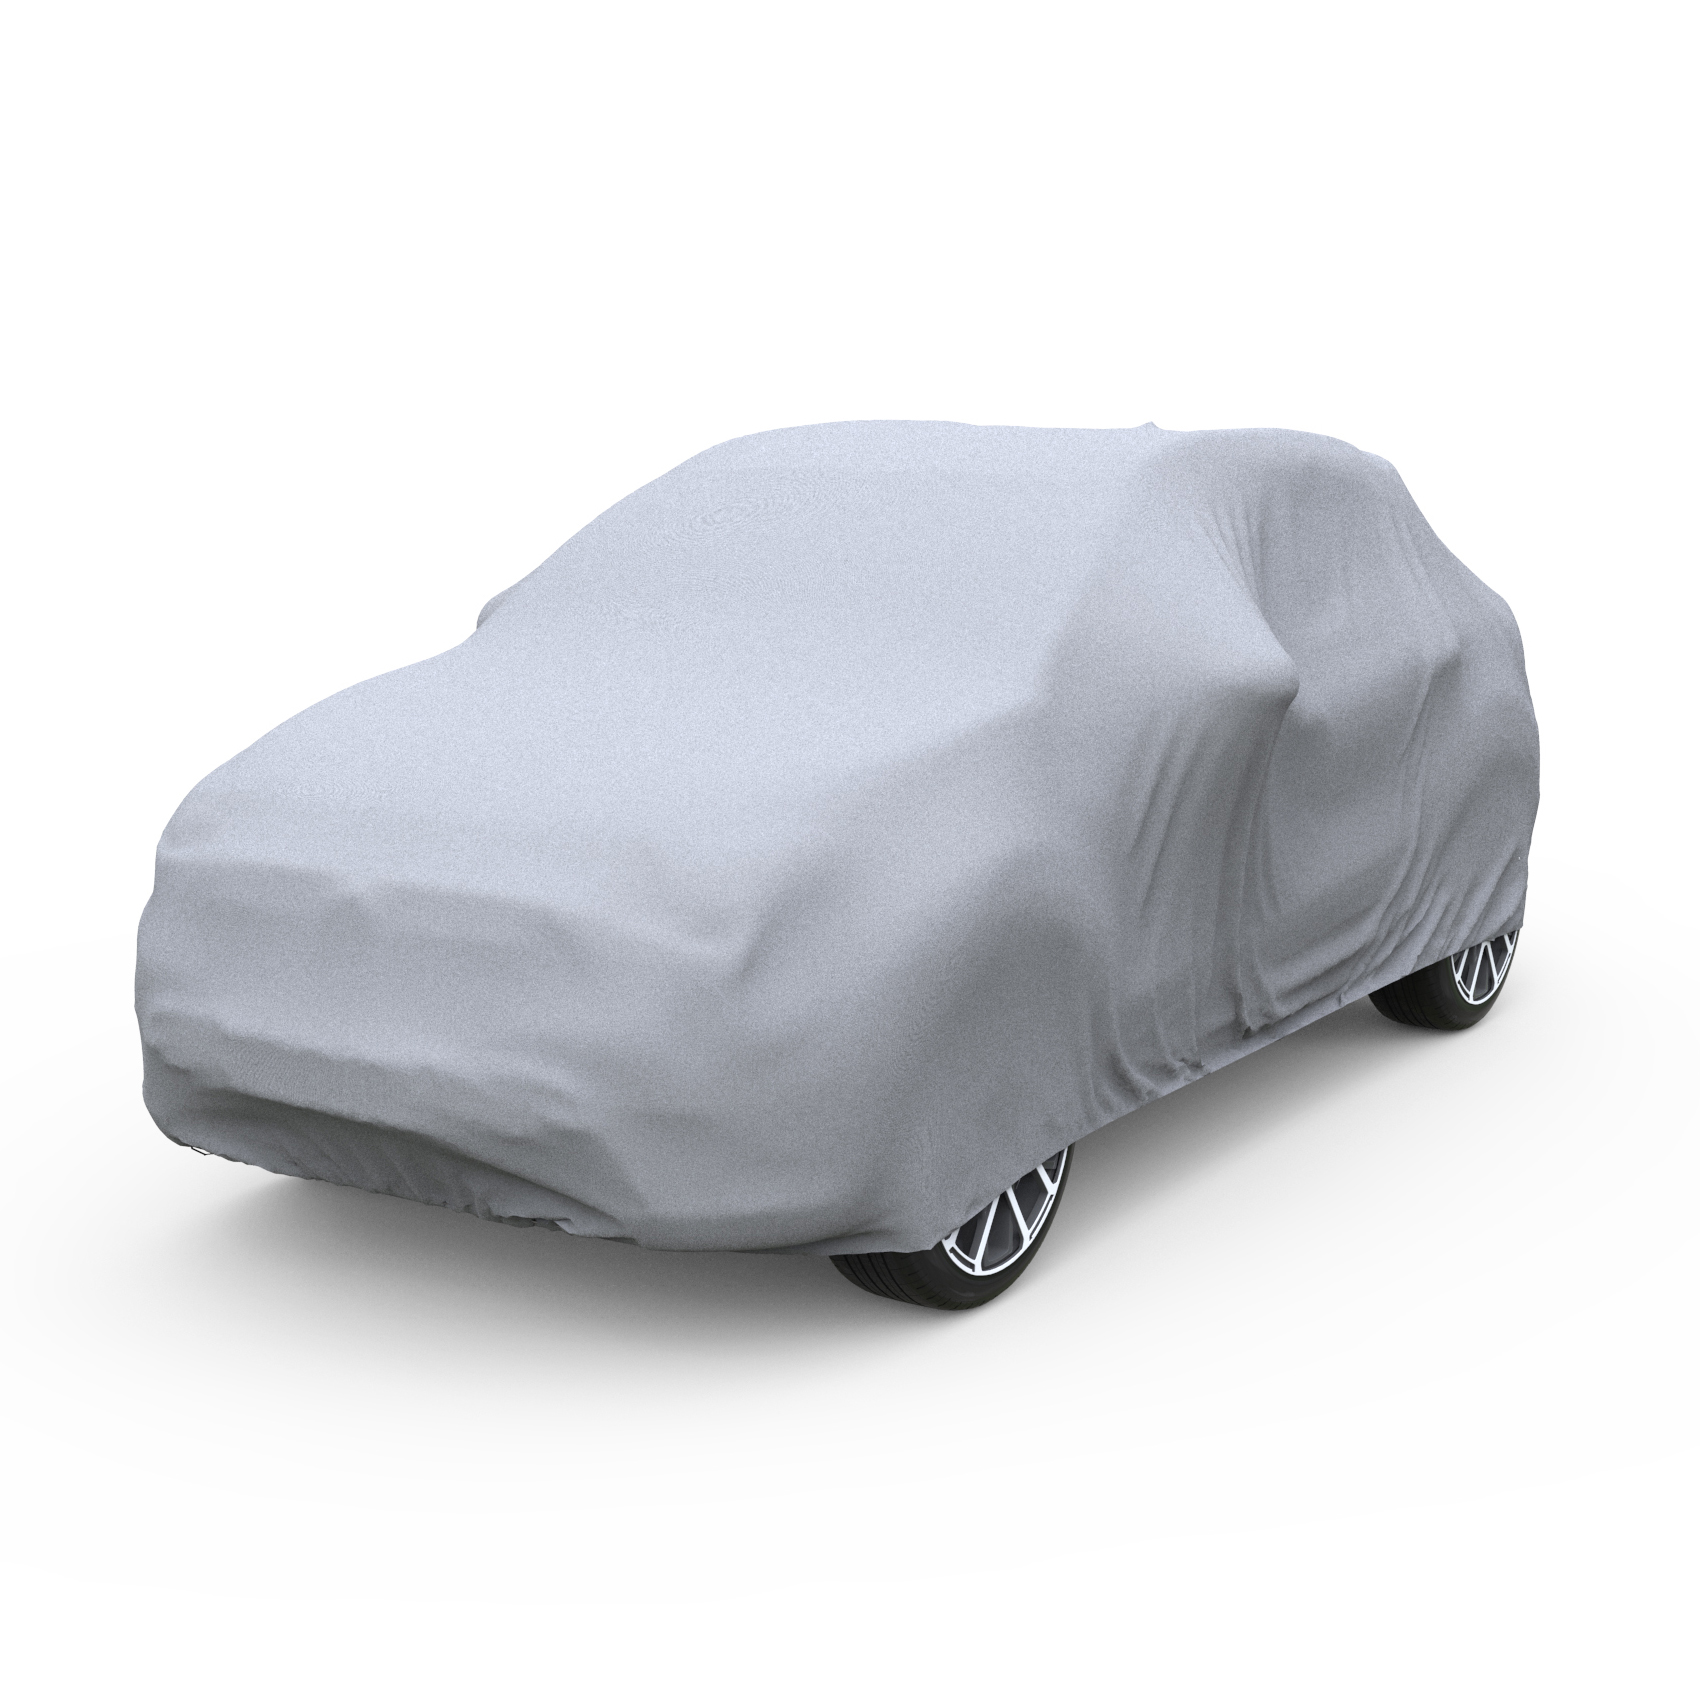 Budge Ultra Car Cover, Standard UV and Dirt Protection for Cars, Multiple  Sizes Fits select: 1992-2000 HONDA CIVIC, 2007-2012 TOYOTA YARIS